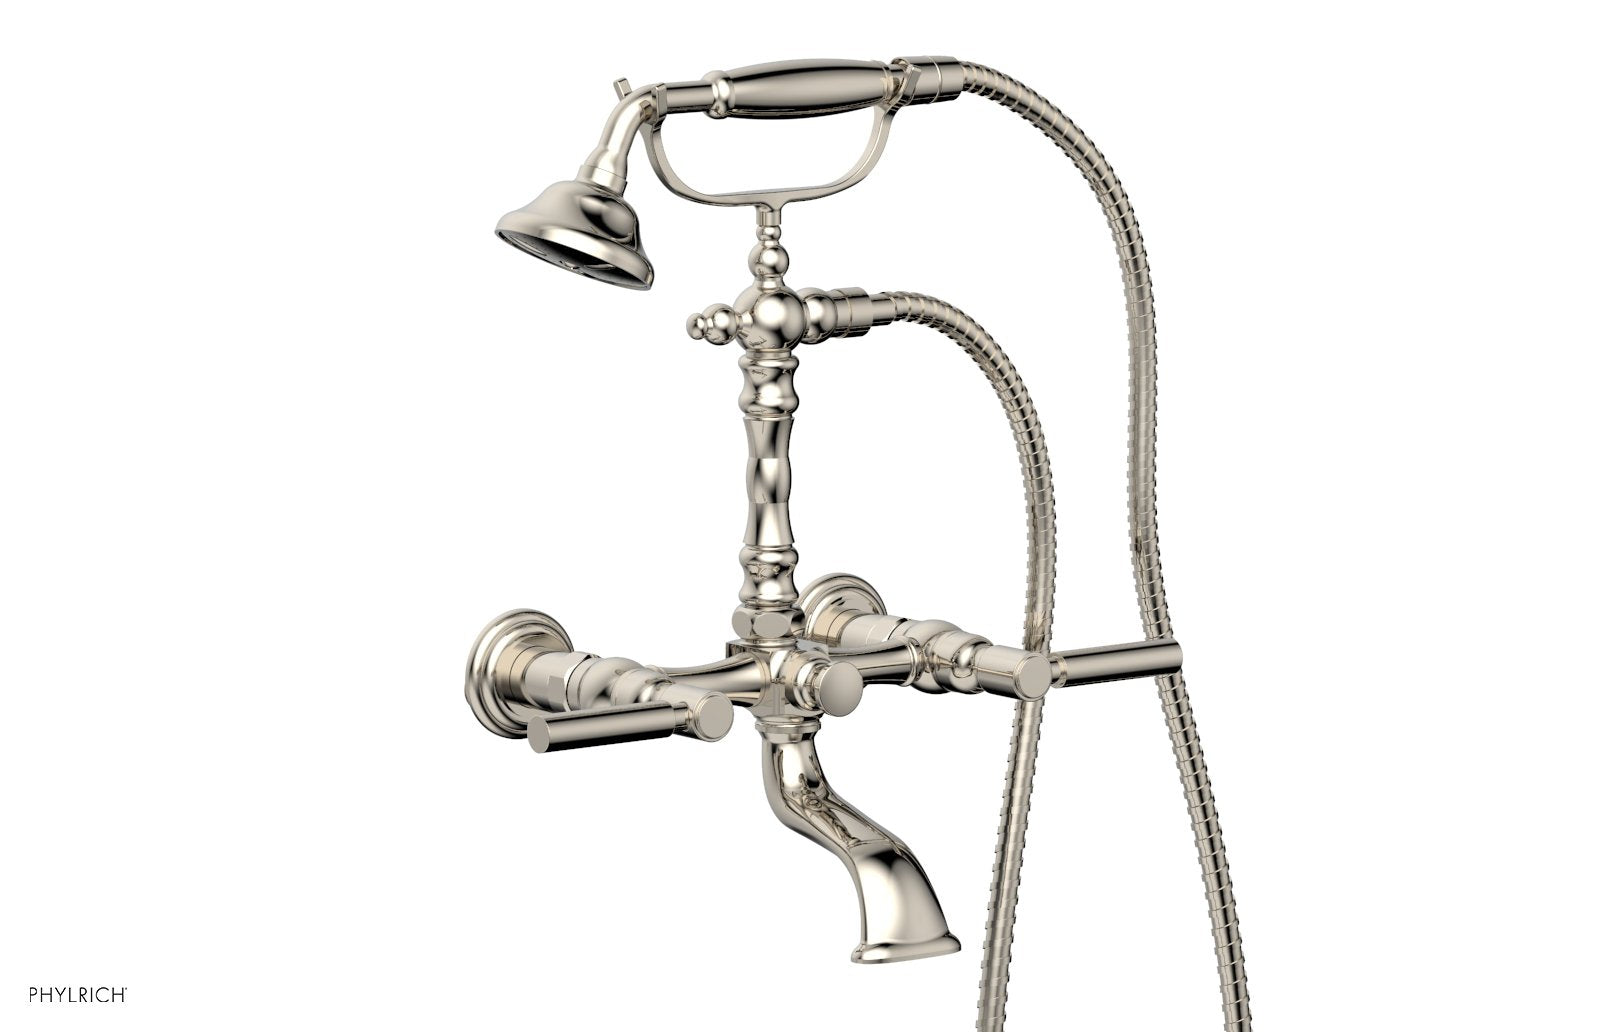 Phylrich BASIC Exposed Tub & Hand Shower - Lever Handle